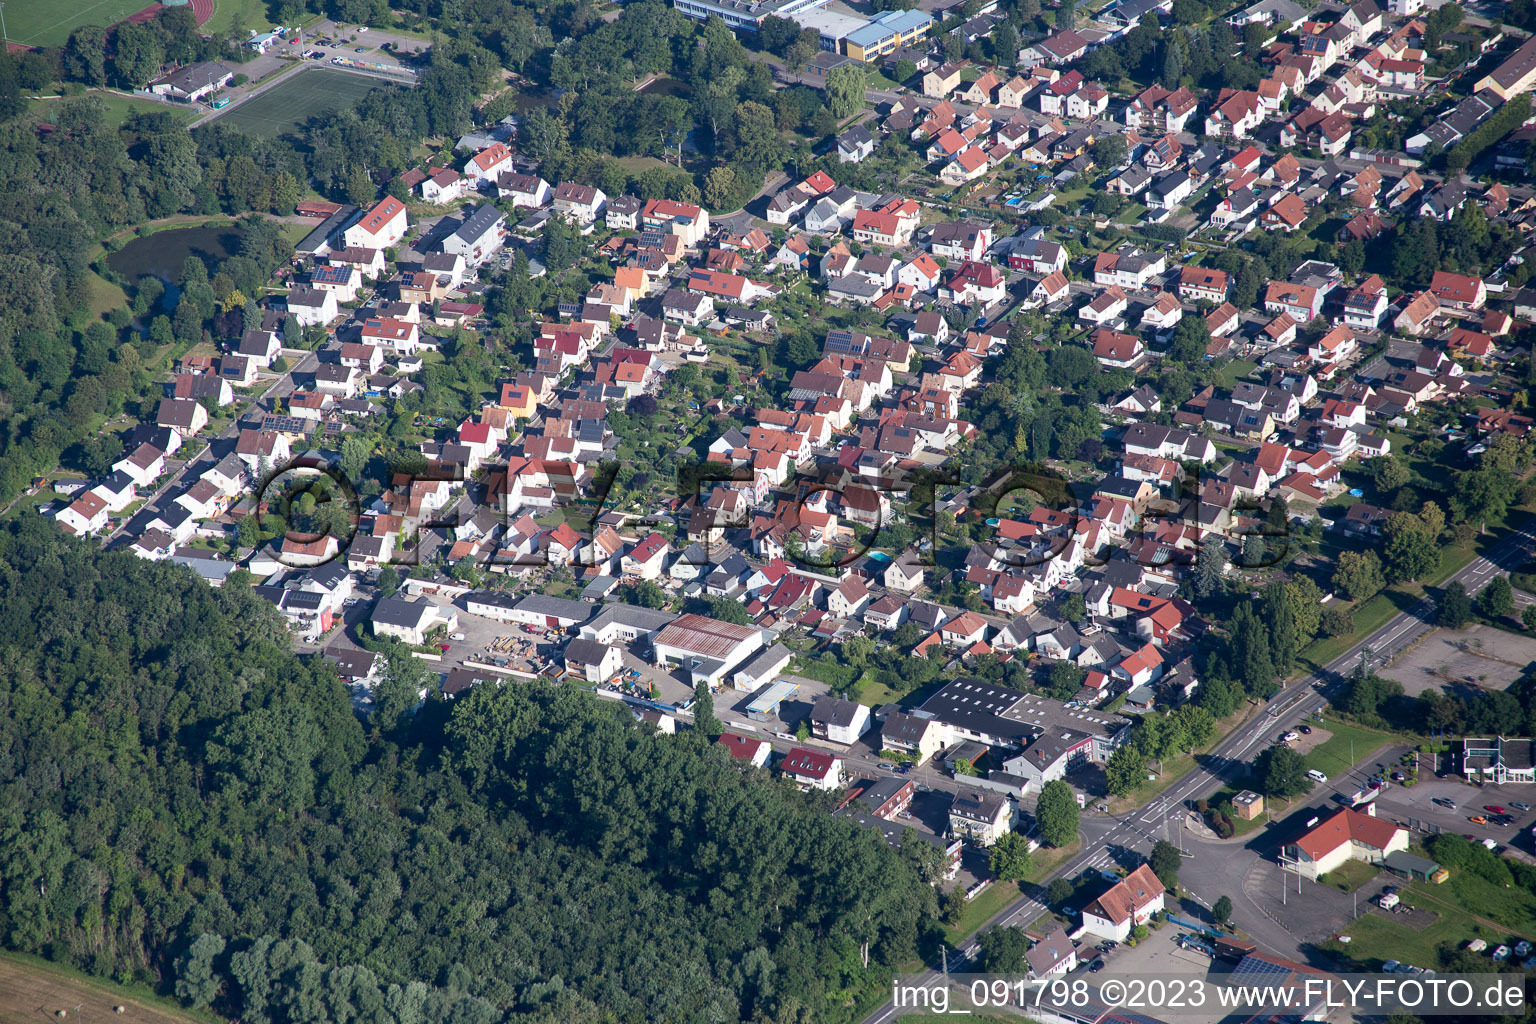 Kandel in the state Rhineland-Palatinate, Germany from the drone perspective